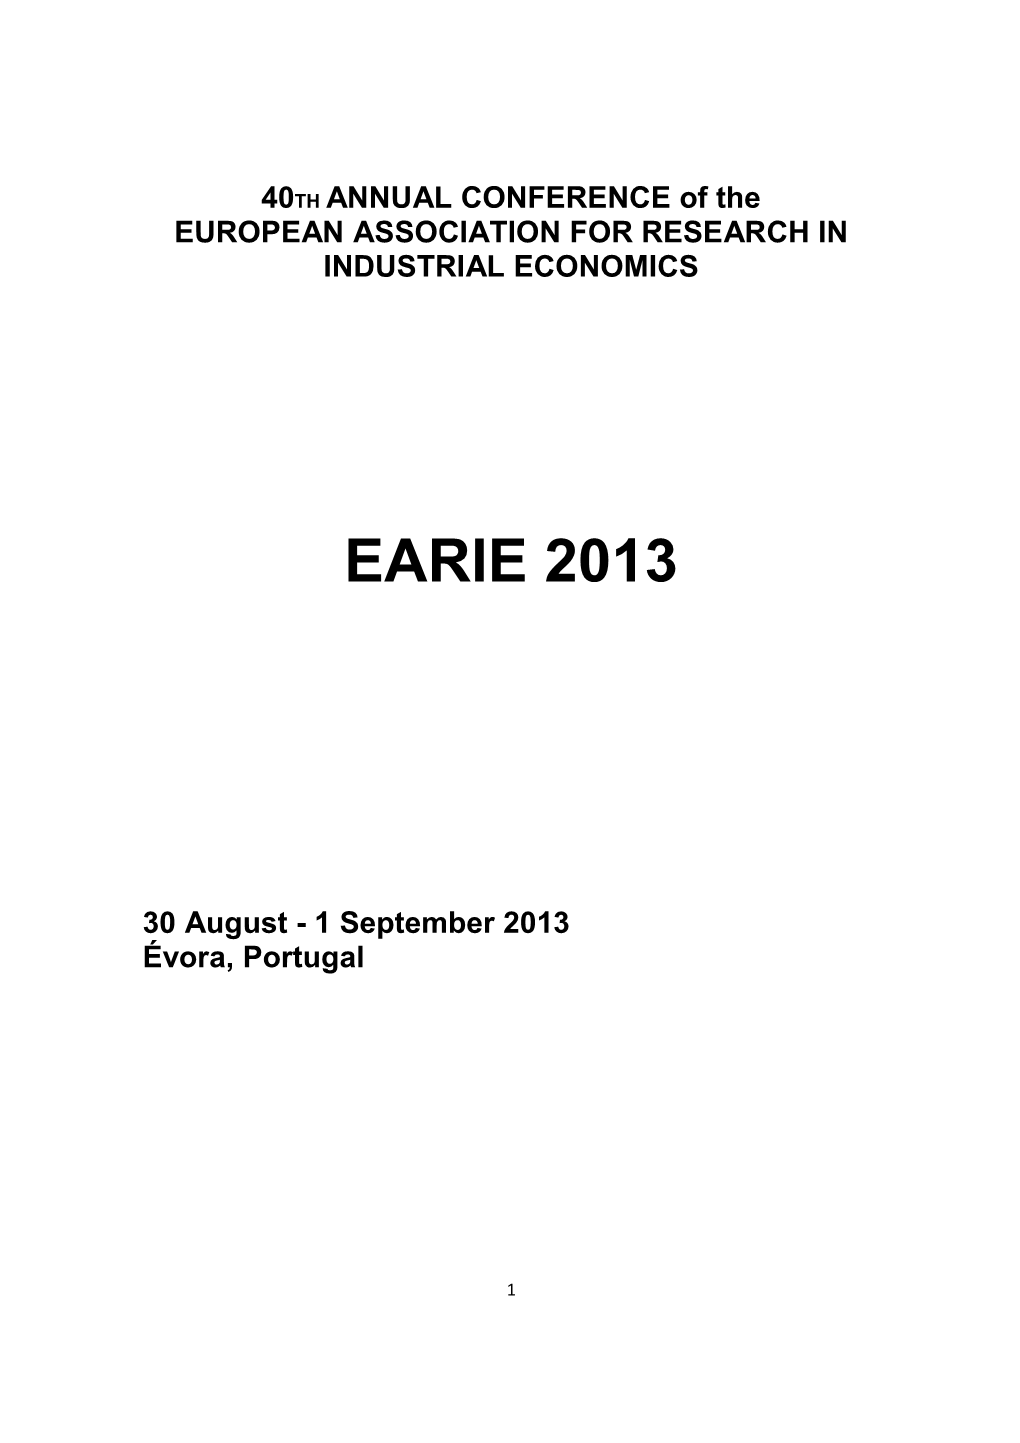 EARIE 2013 Conference Programme